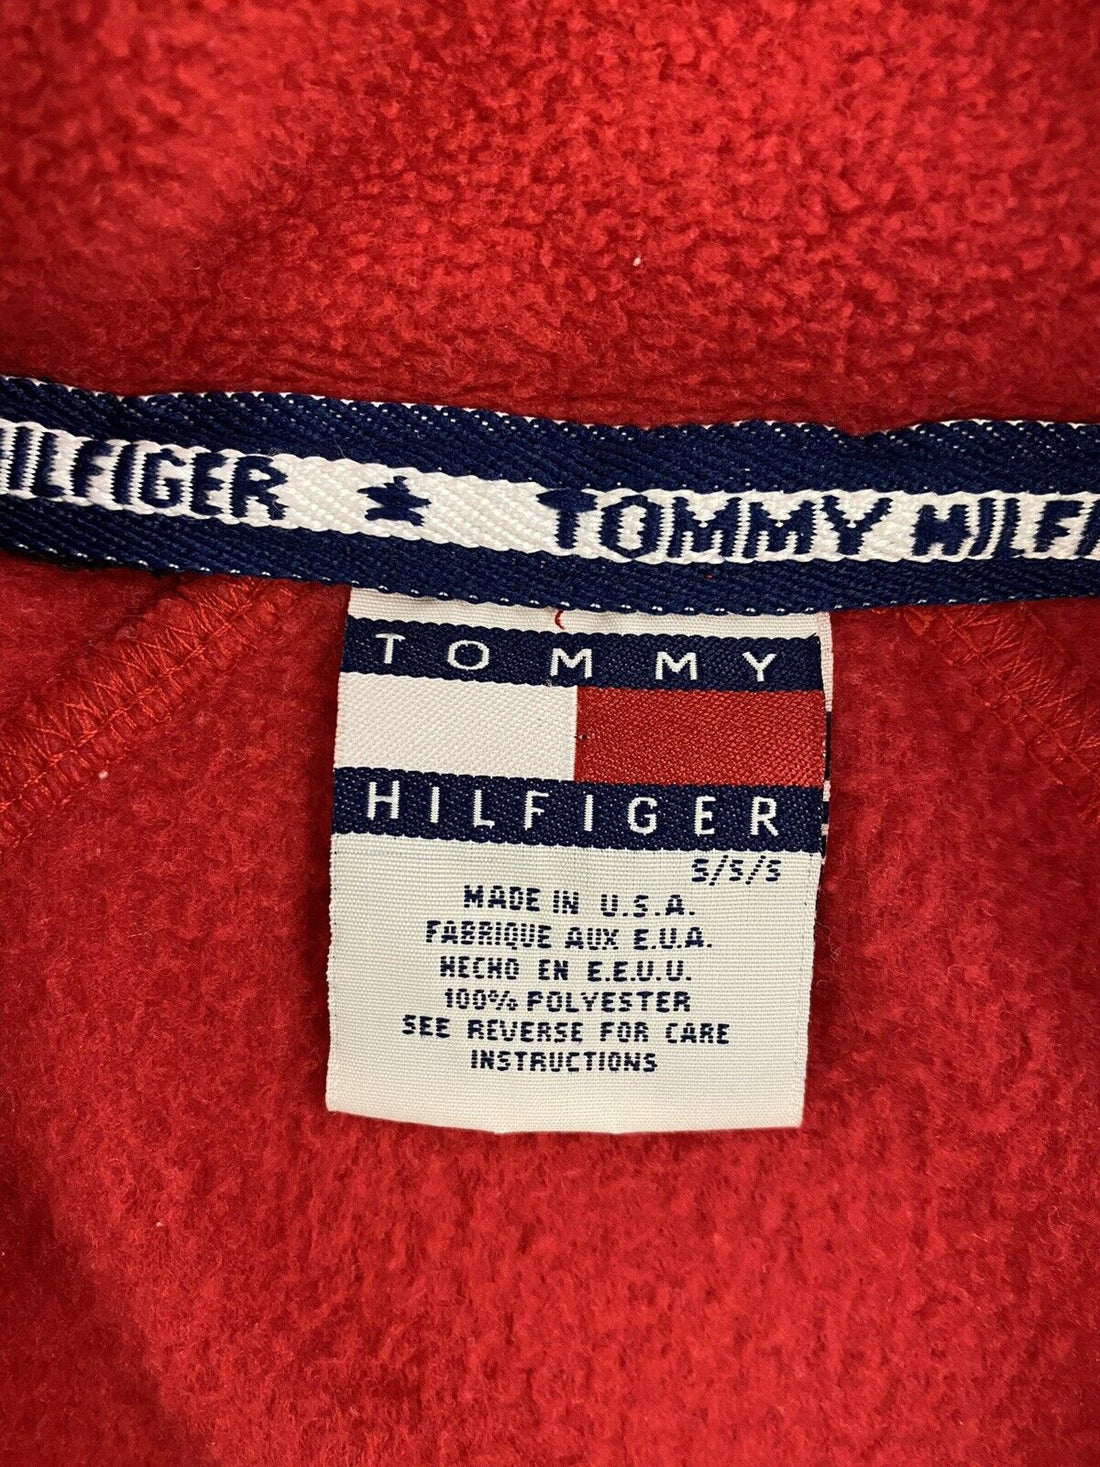 Vintage Tommy Hilfiger Crest Fleece Jacket Size Small Made USA Sleeve Spell Out